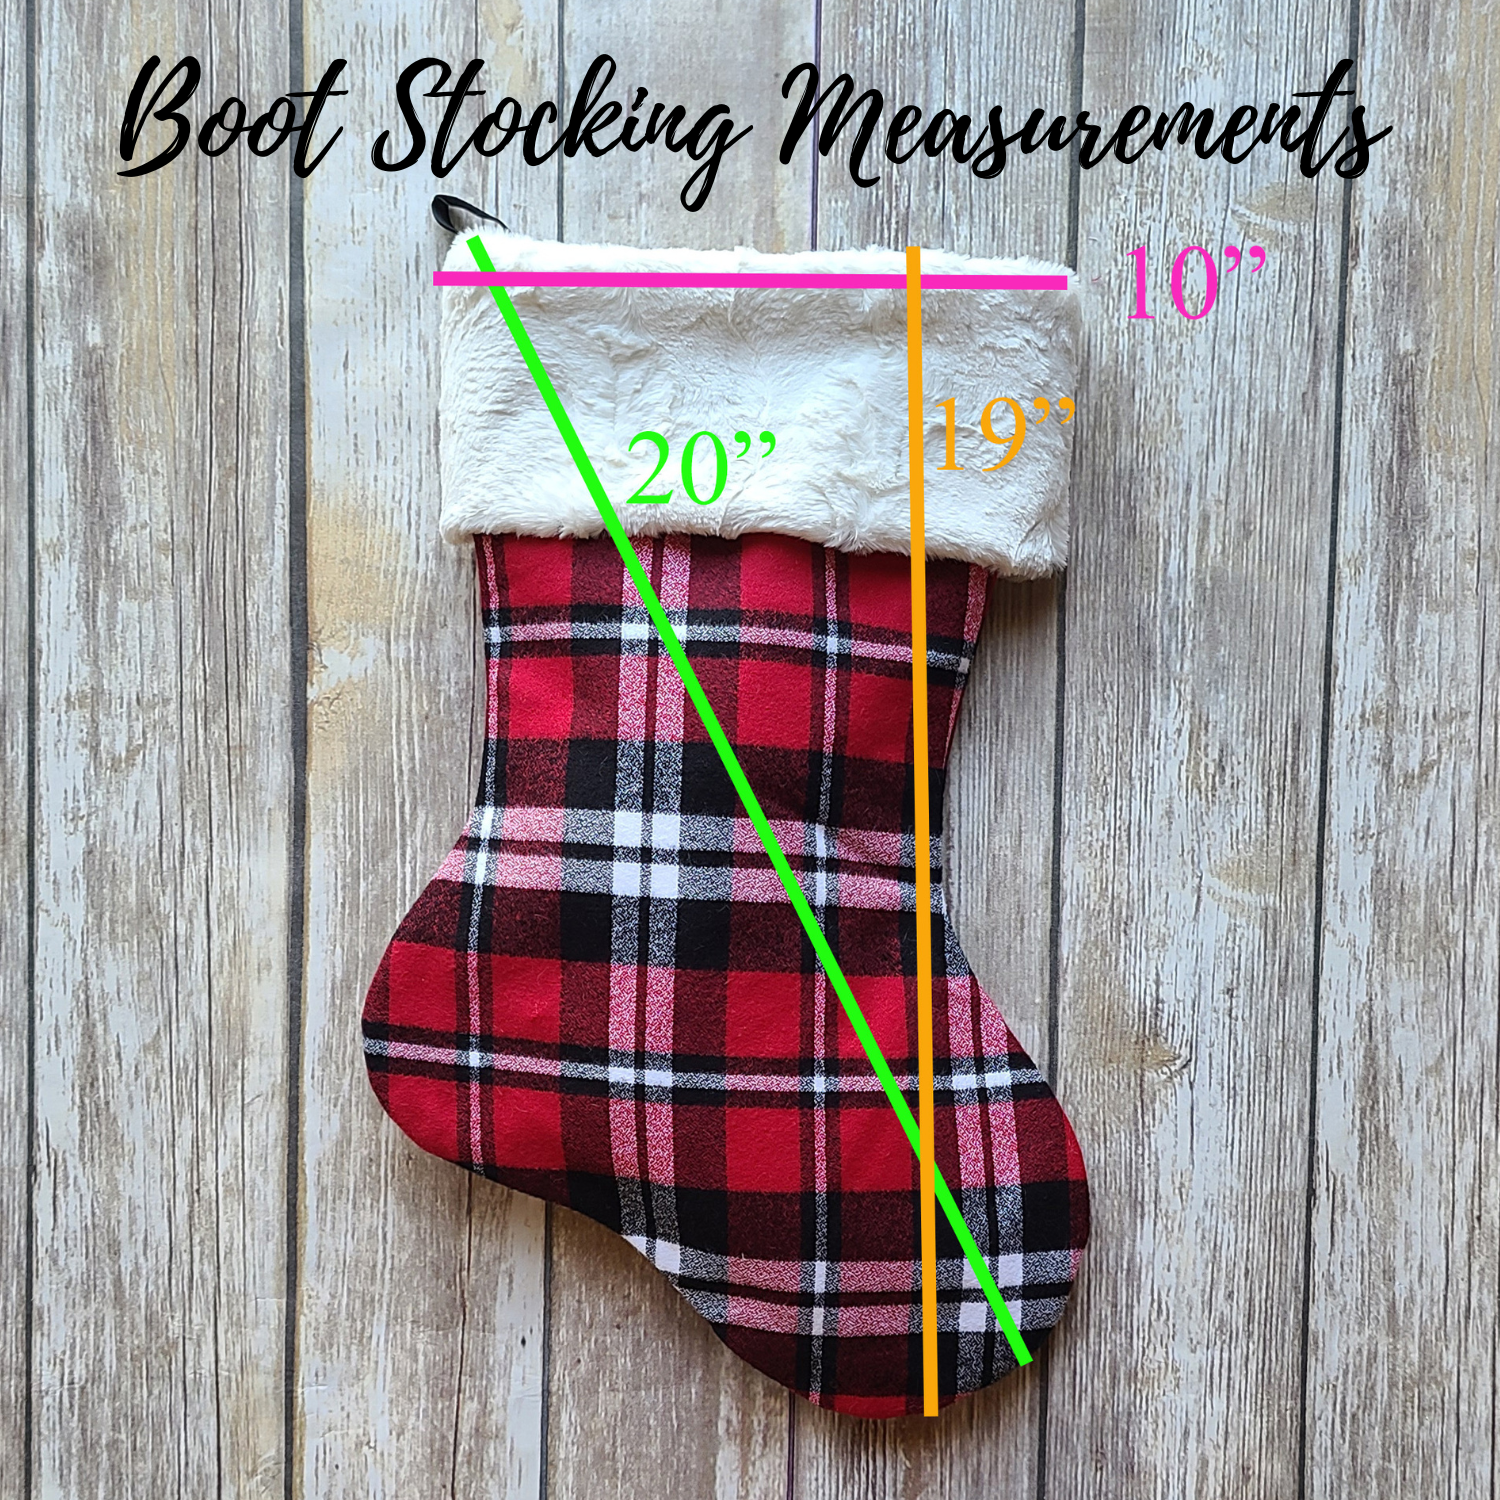 Personalized Blue and Green Plaid Christmas Stocking with Fur Cuff